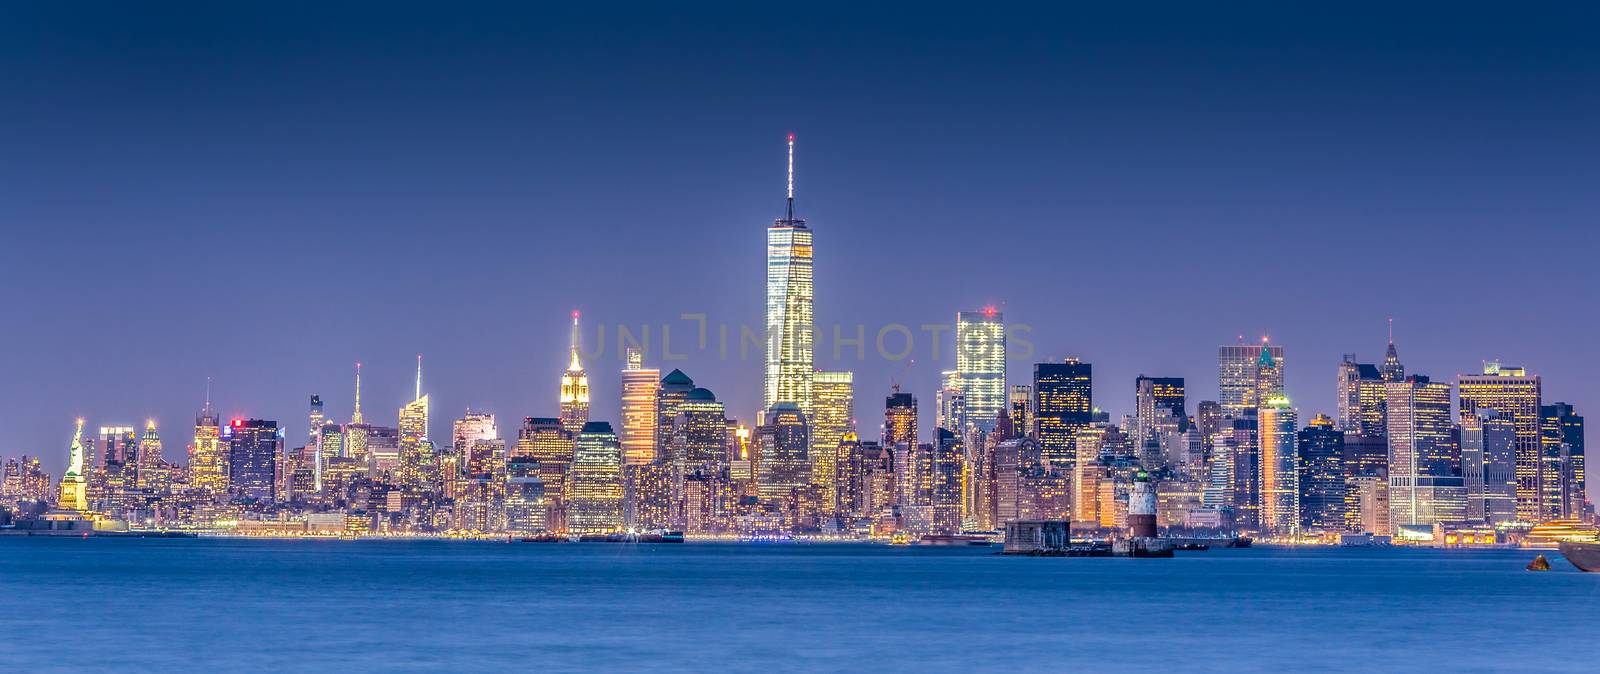 New York City Manhattan downtown skyline at dusk with skyscrapers illuminated over Hudson River panorama. Horizontal composition, copy space.